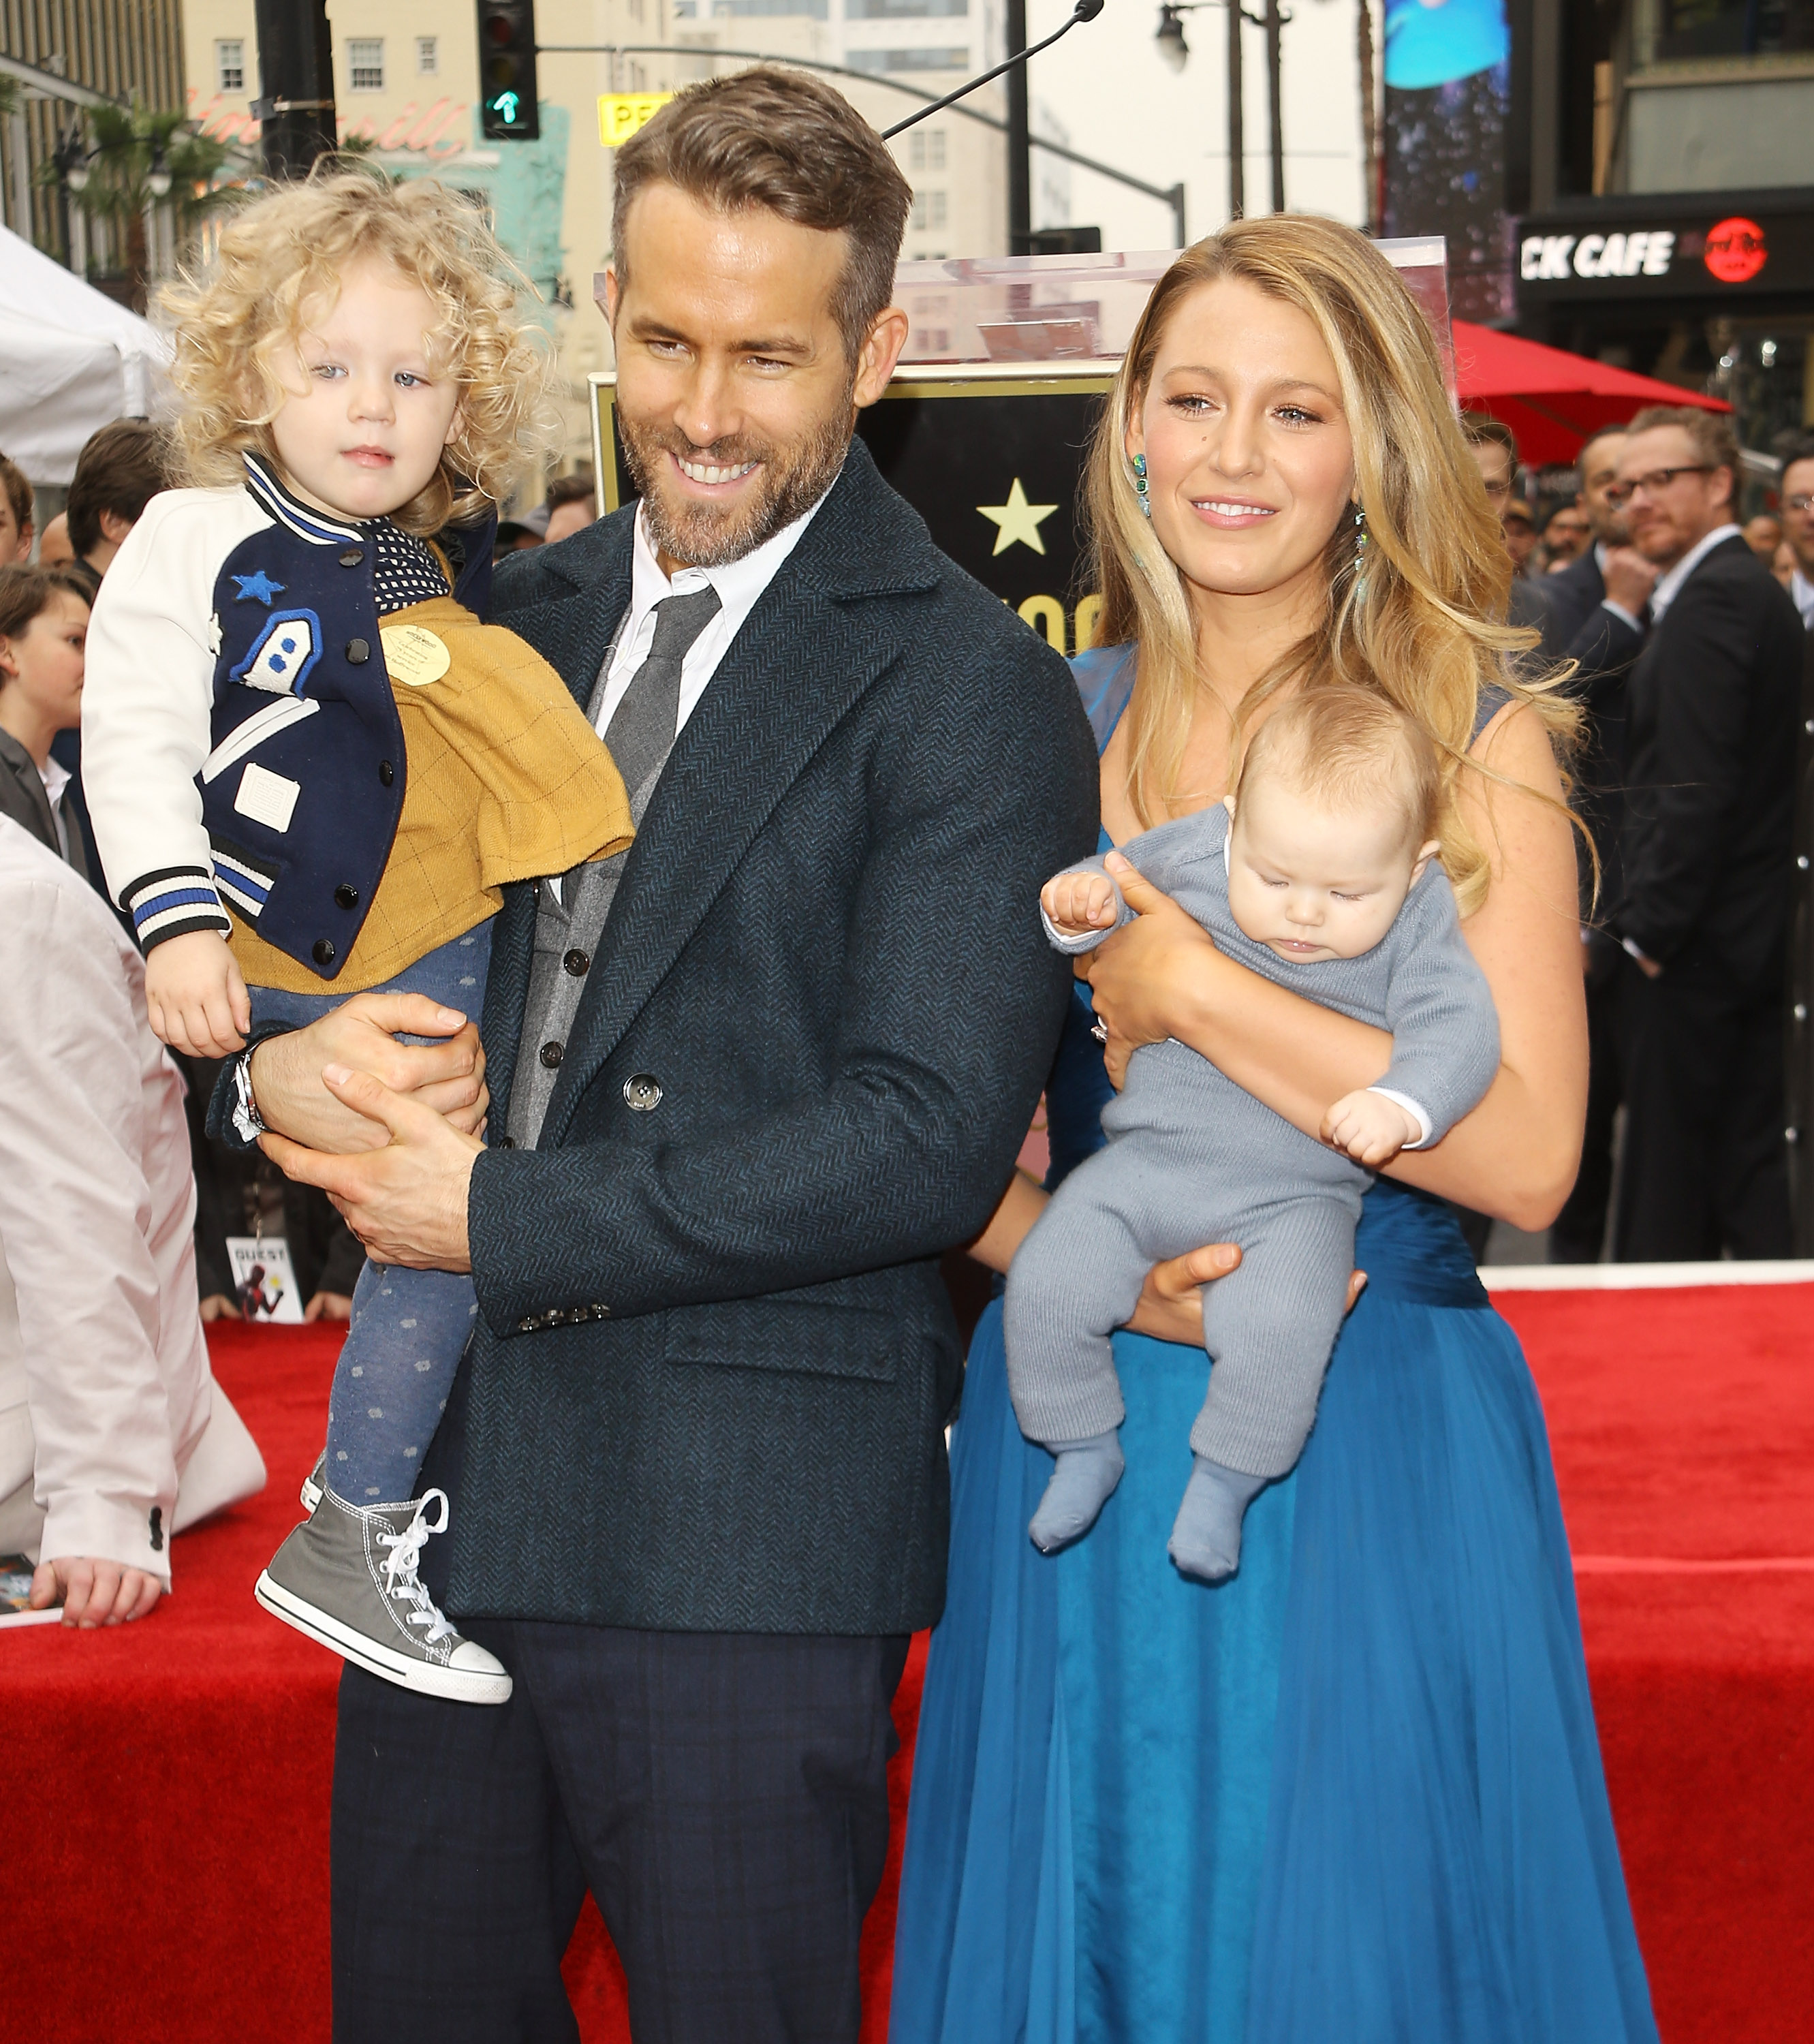 Ryan Reynolds (L) and Blake Lively with their daughters attend the ceremony honoring actor Ryan Reynolds with a Star on The Hollywood Walk of Fame held on December 15, 2016 in Hollywood, California | Source: Getty Images